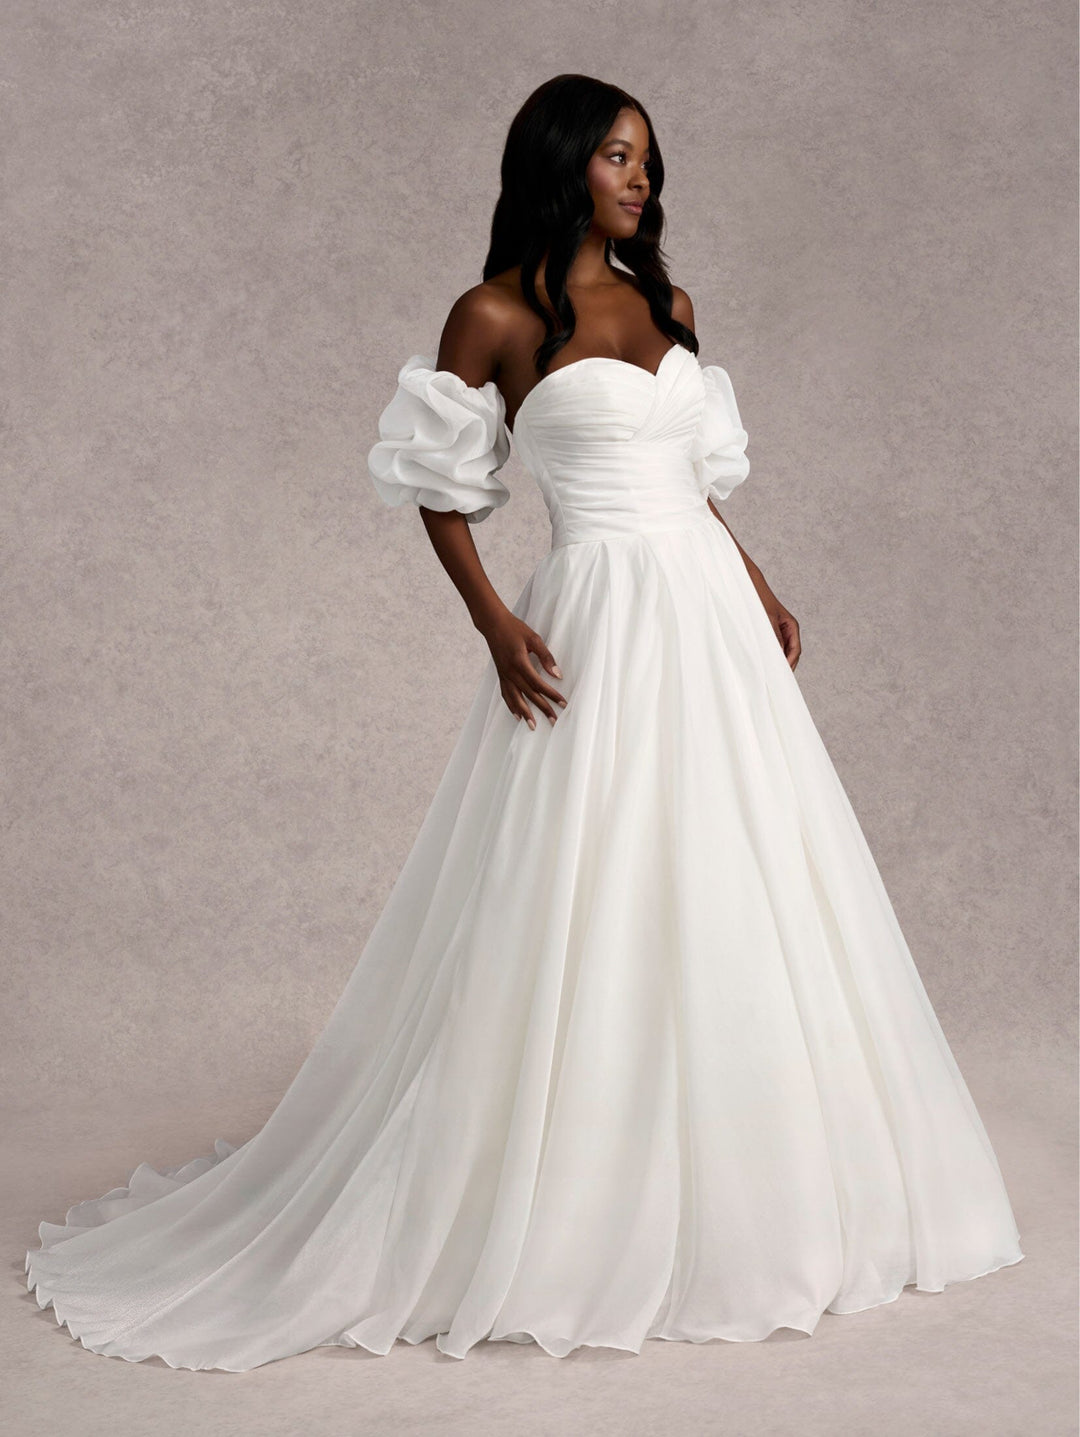 Strapless Puff Sleeve Bridal Gown by Adrianna Papell 31255